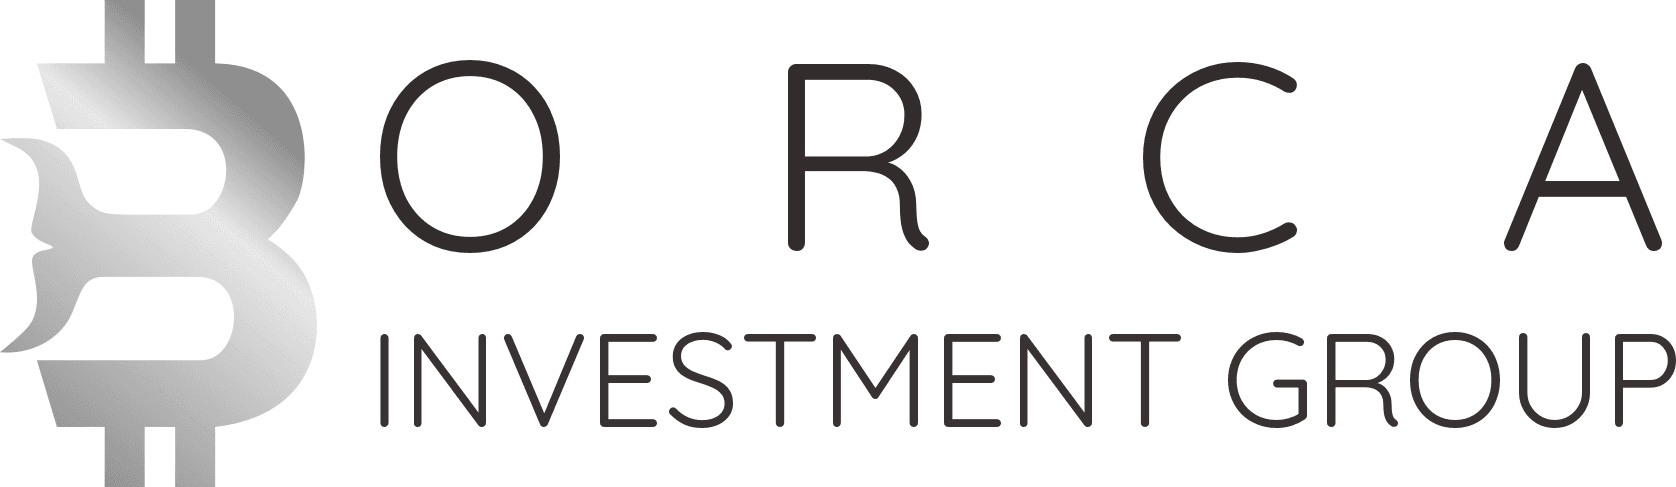 OrcalnvestmentGroup